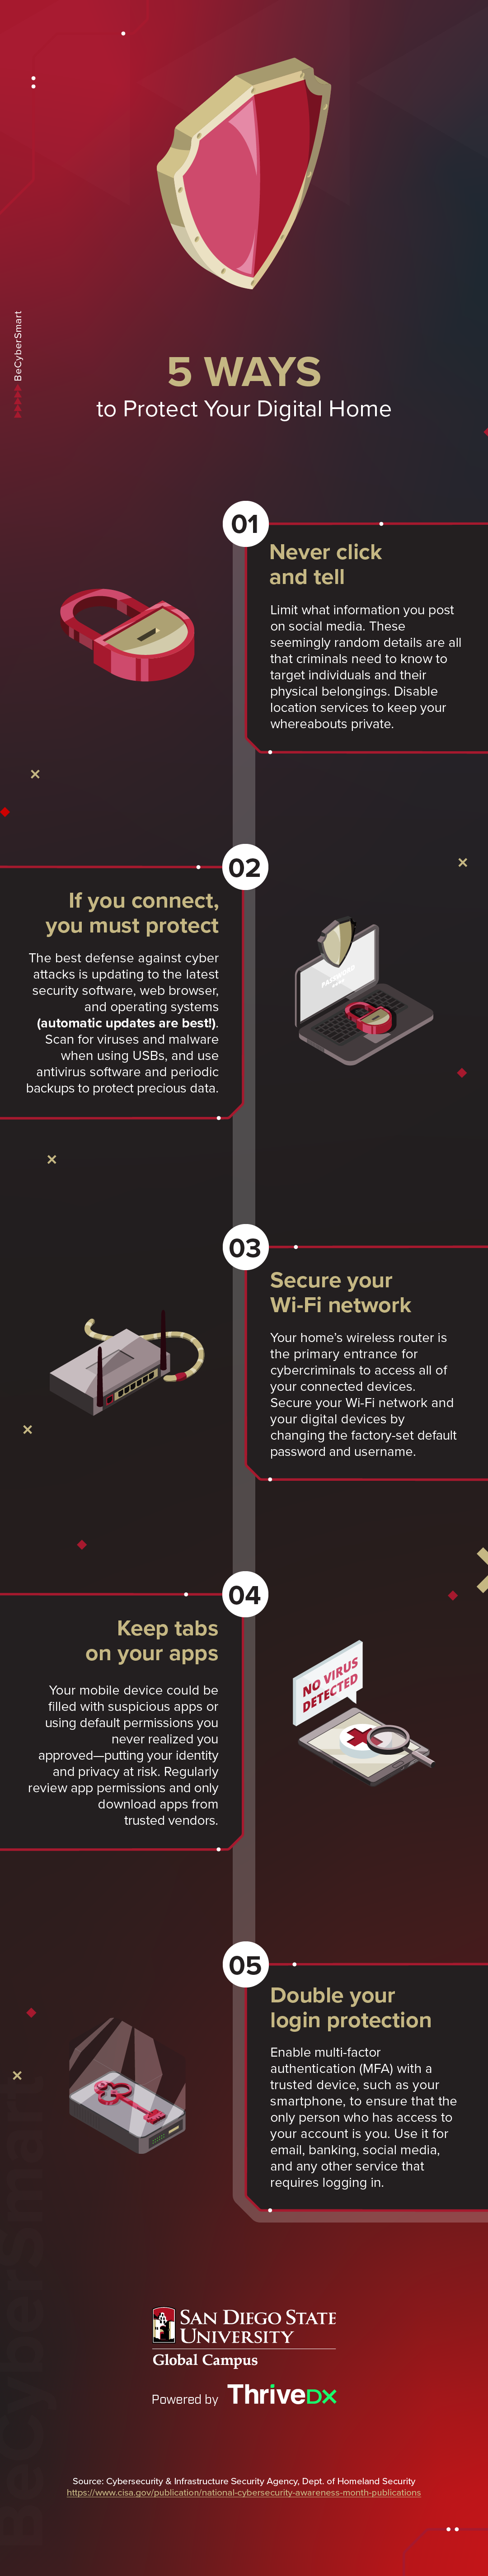 5 ways to protect your smart home infographic